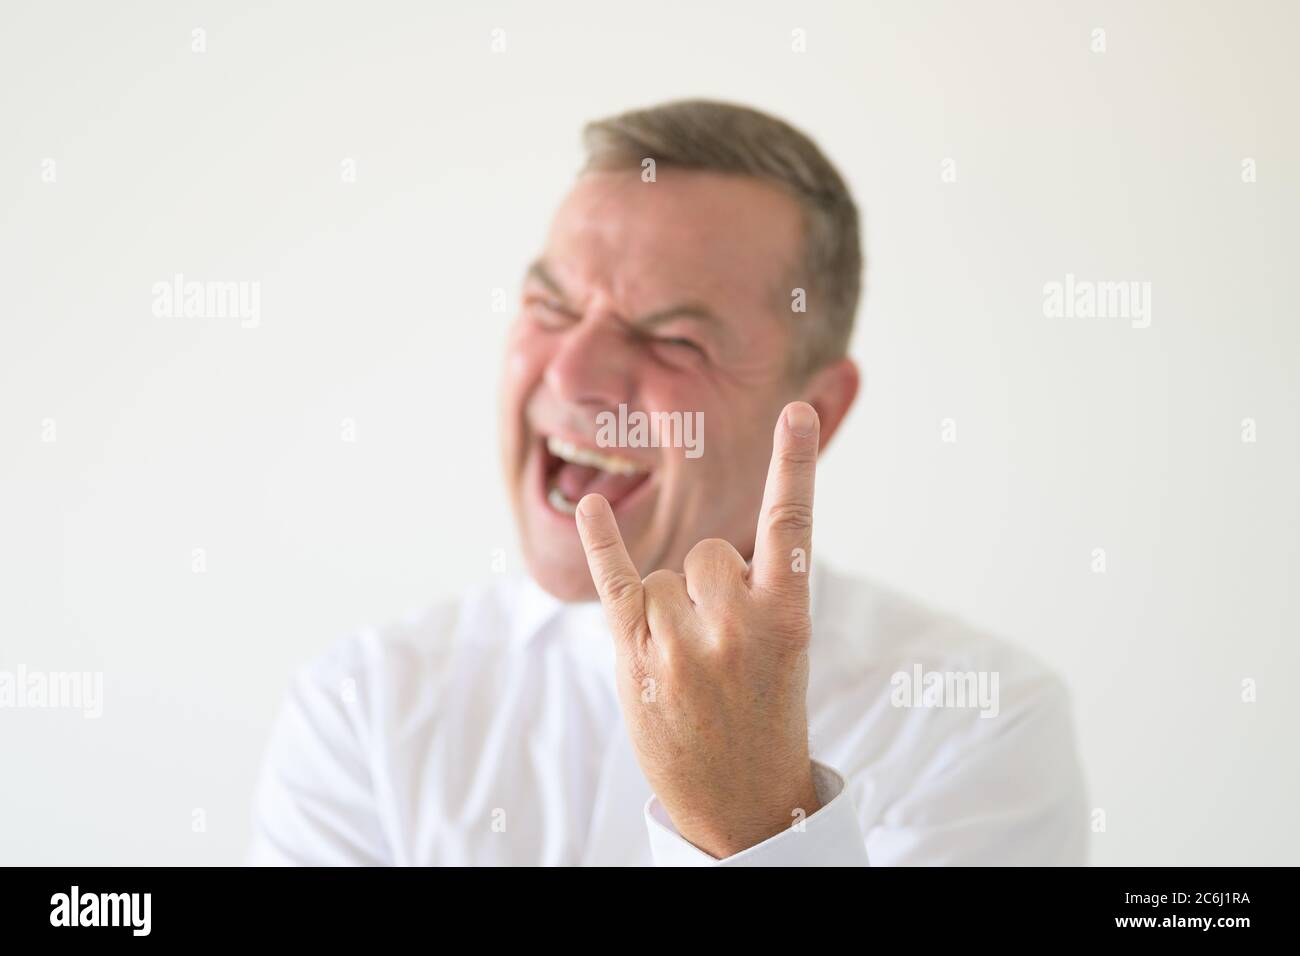 Angry middle-aged man making a Horns gesture with focus to his hand in a head and shoulders portrait on white Stock Photo